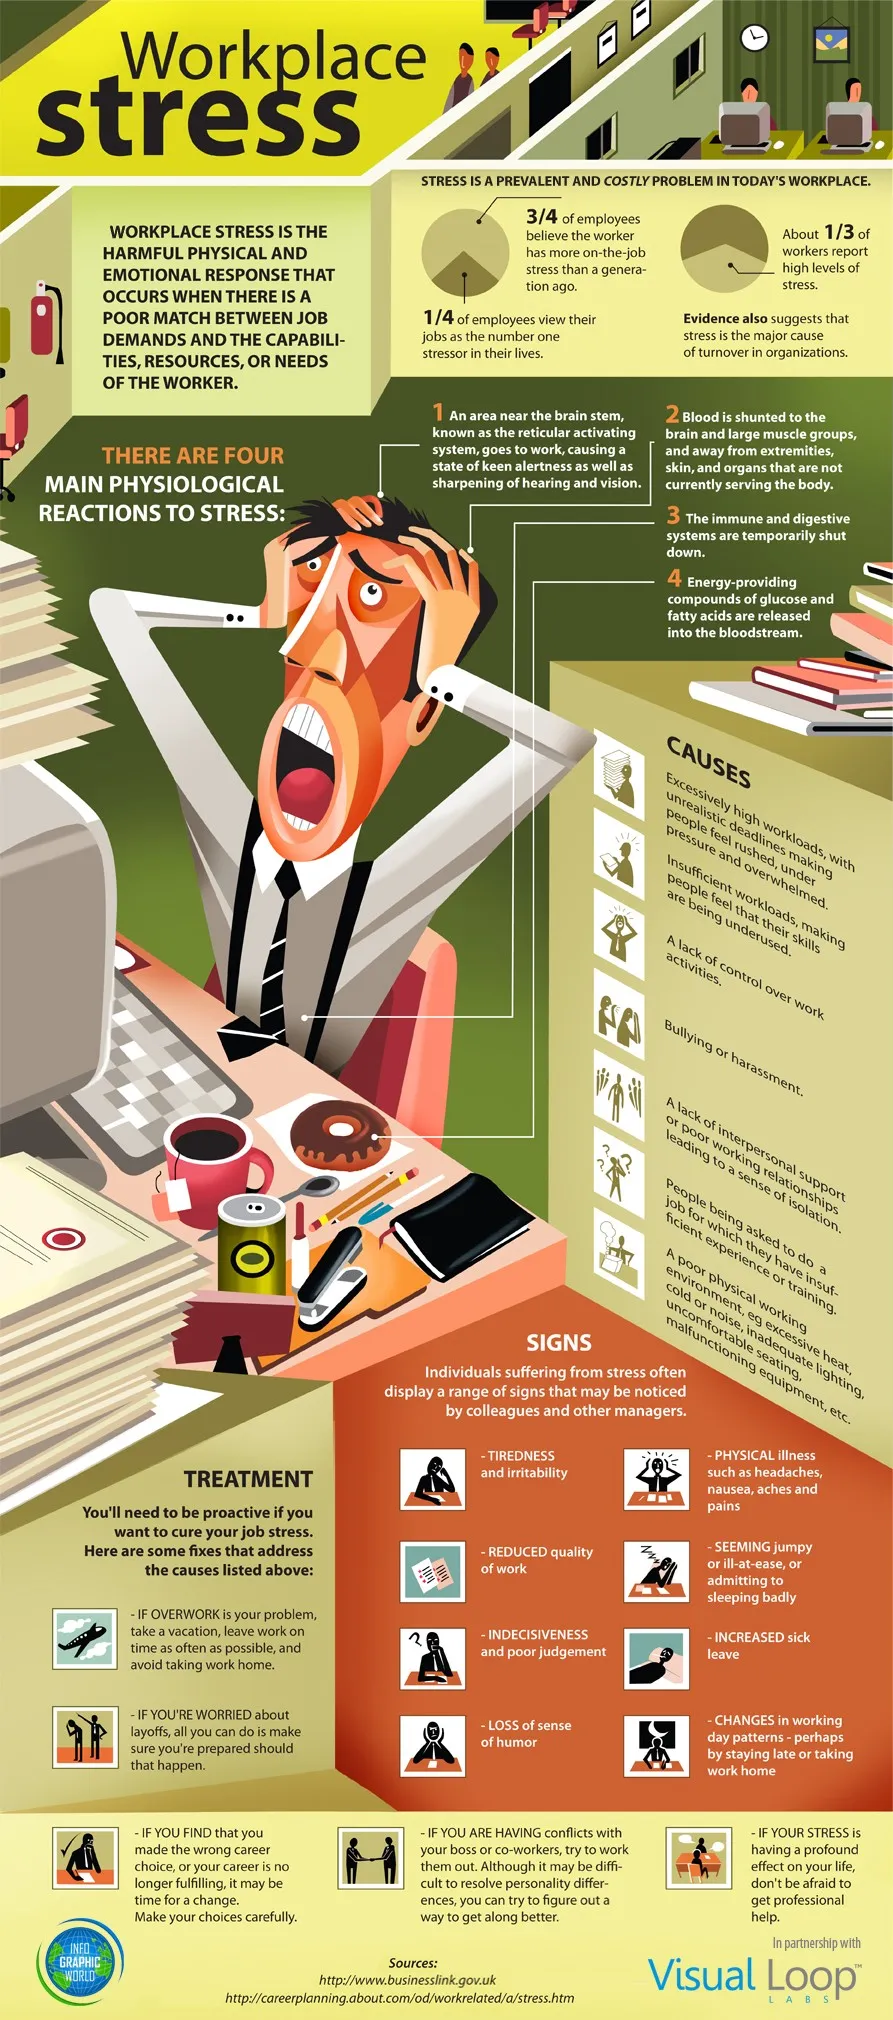 Workplace Stress: Signs, Causes & Treatment  - ComplianceandSafety.com